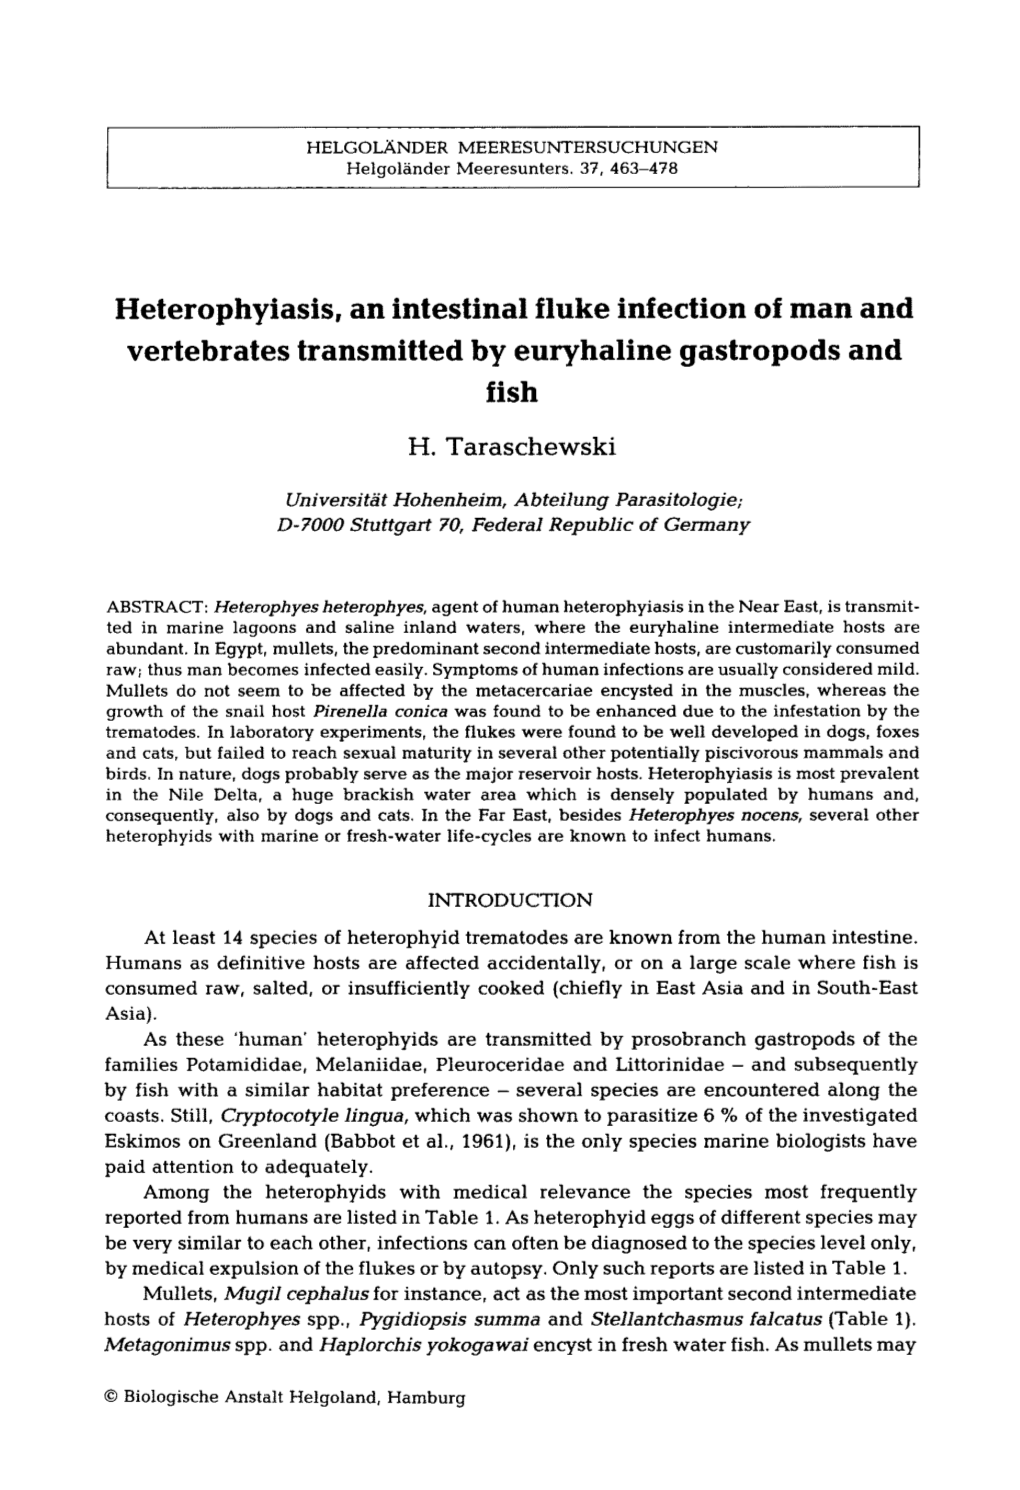 Heterophysiasis, an Intestinal Fluke Infection of Man and Vertebrates Transmitted by Euryhaline Gastropods and Fish